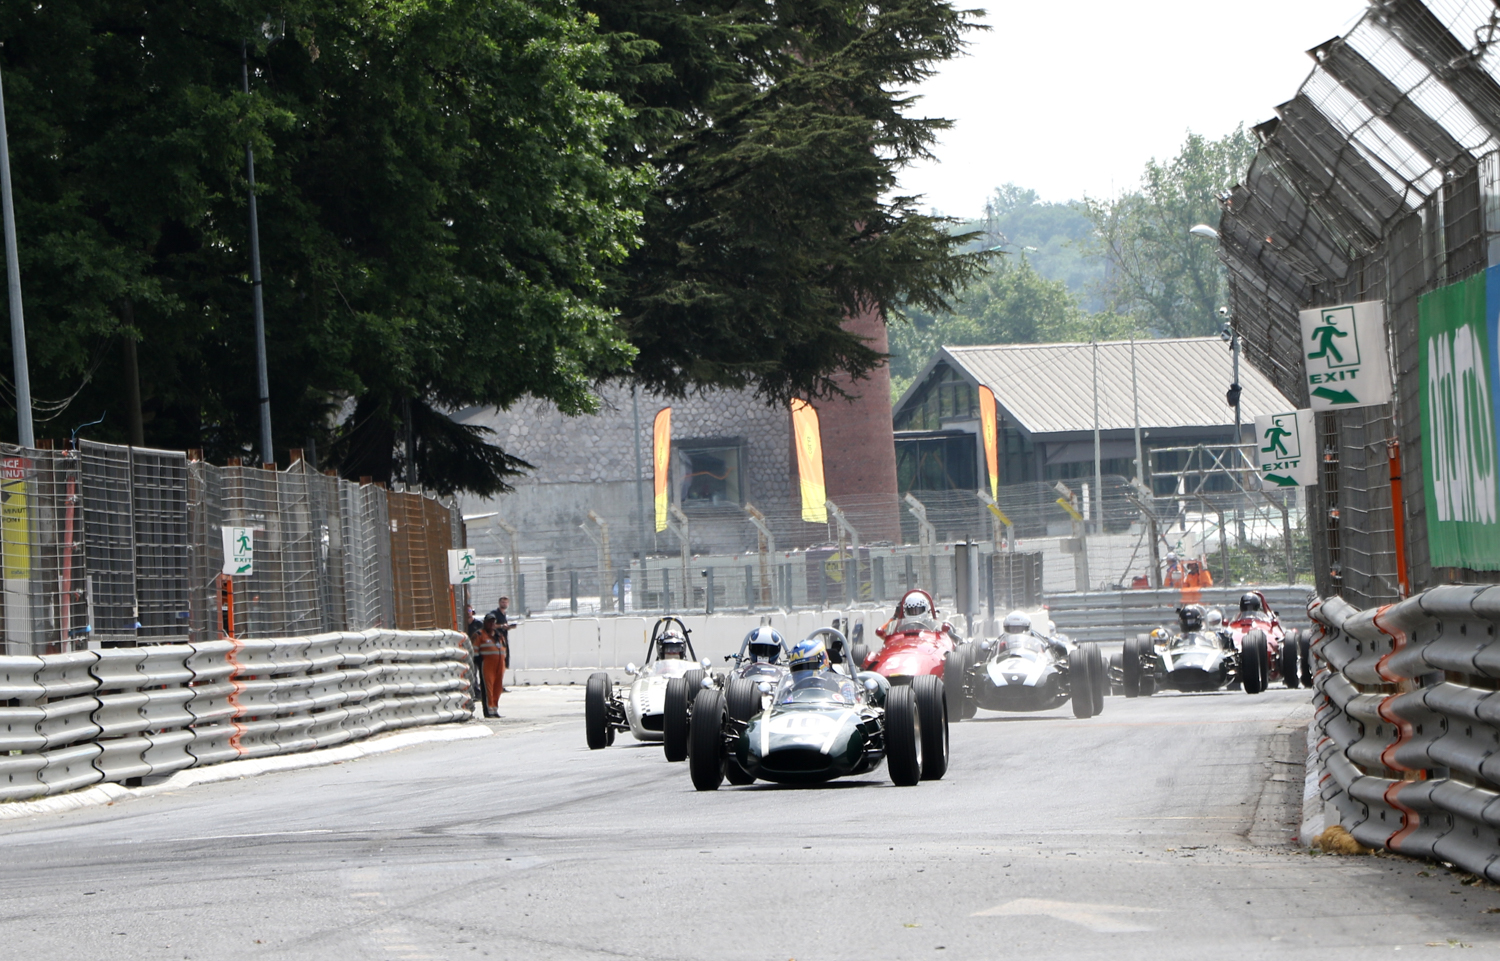 WILL NUTHALL'S COOPER LEADS GRAND PRIX FIELD INTO STATION HAIRPIN. Picasa